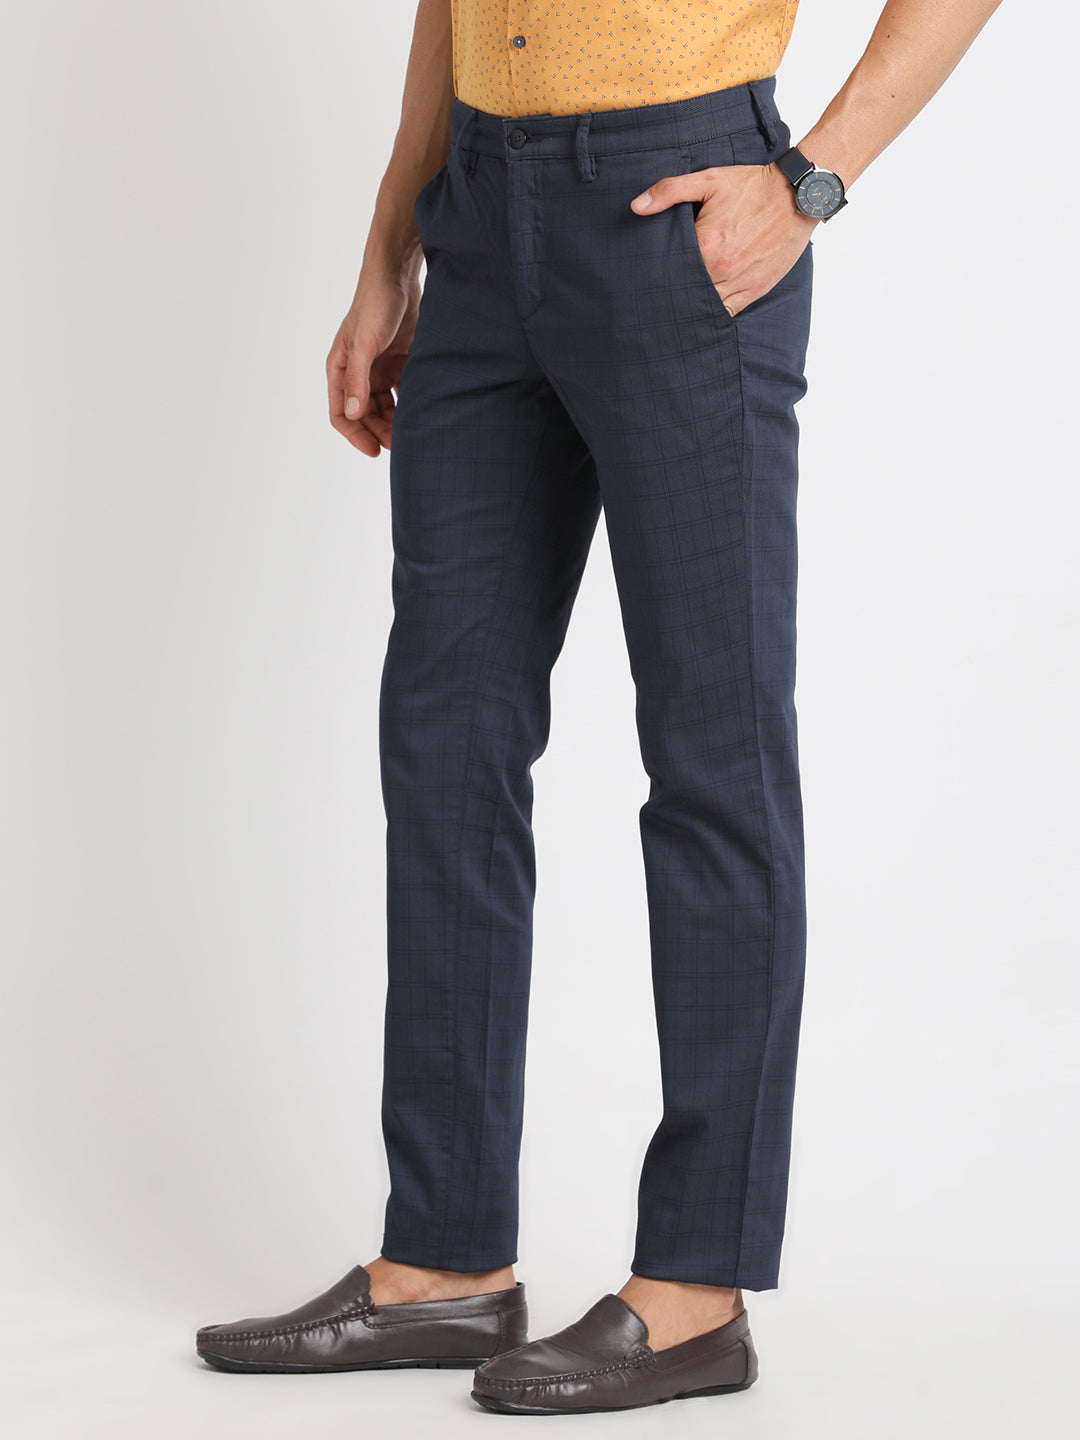 Cotton Stretch Navy Blue Checkered Ultra Slim Fit Flat Front Casual Trouser